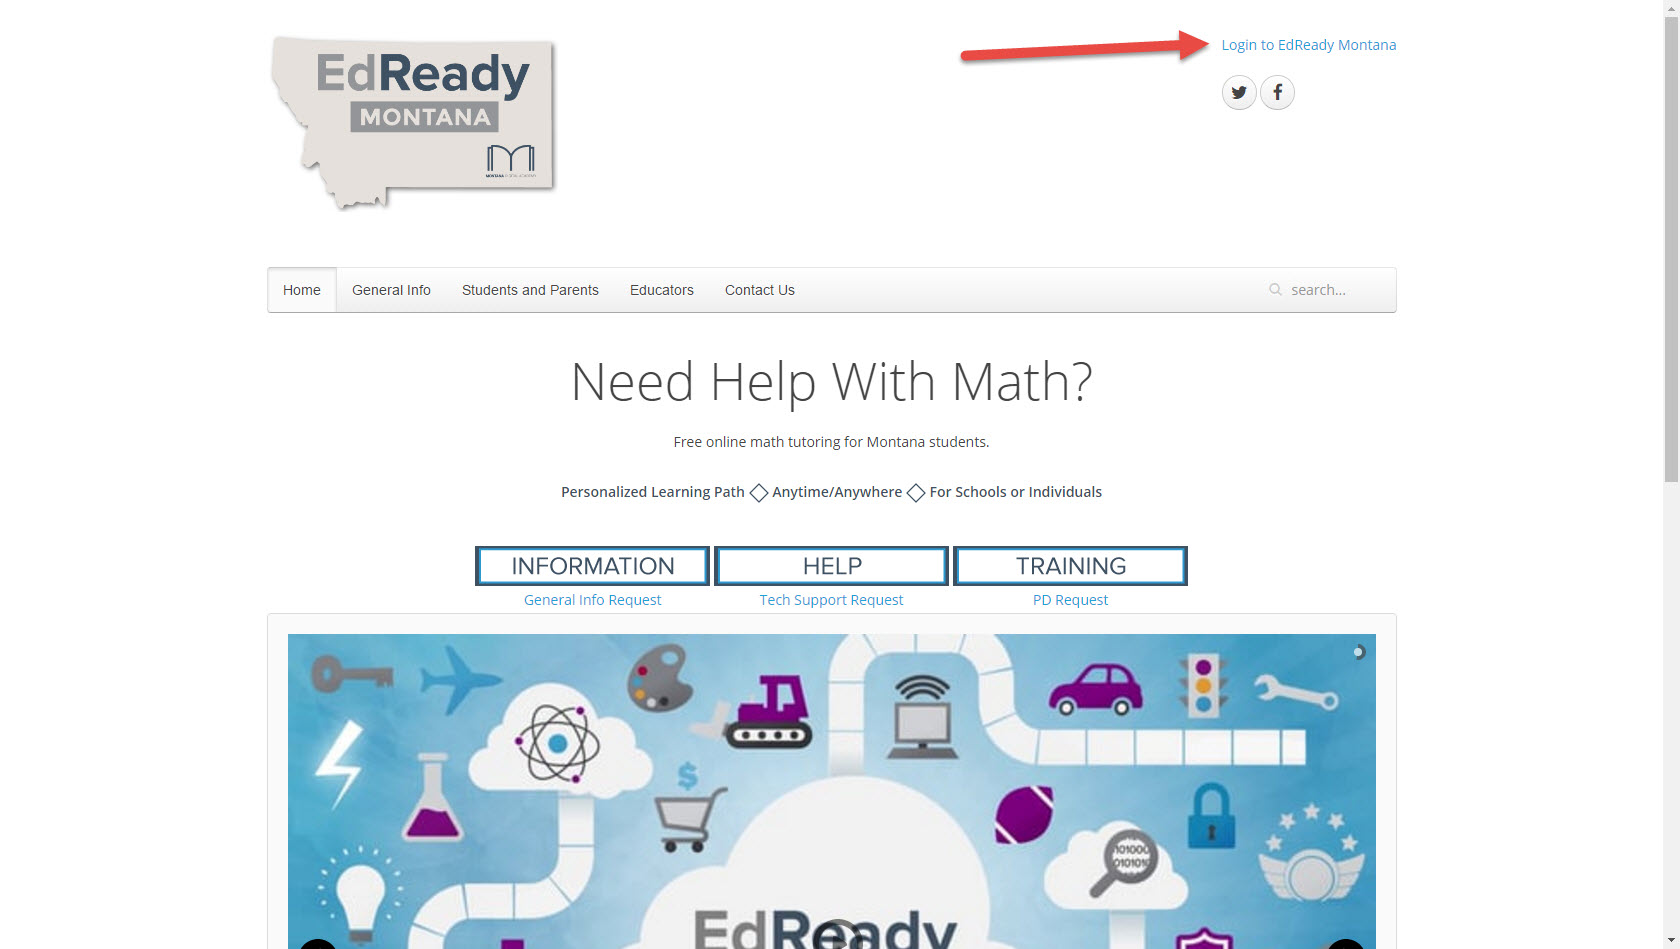 Where to click from the EdReady Montana Homepage